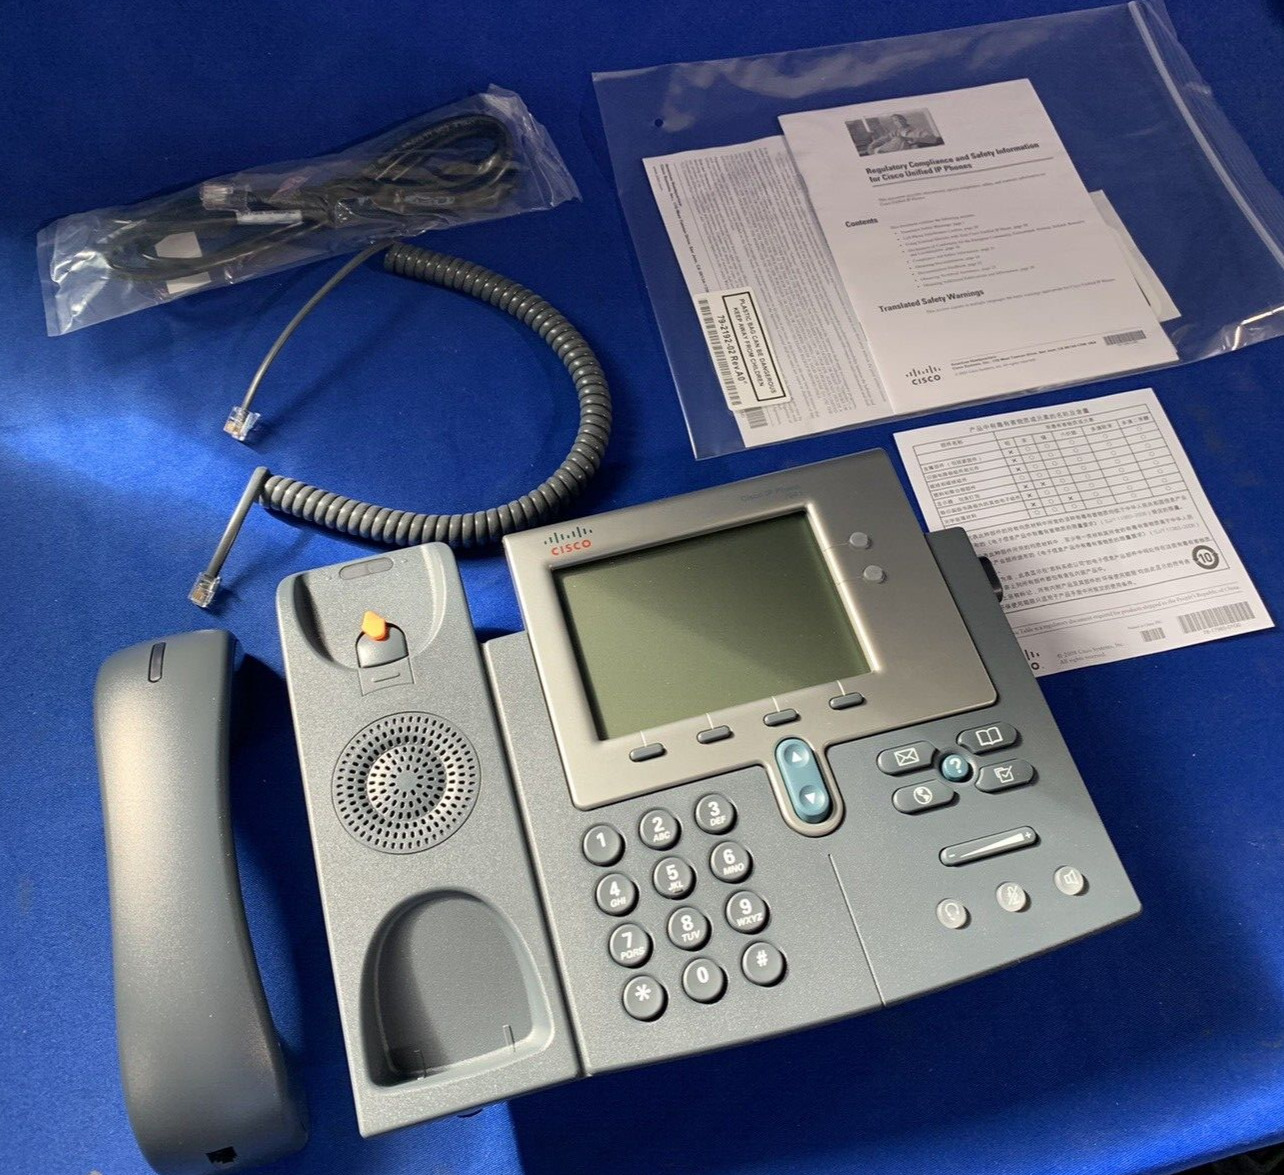 New in Box Cisco 7941G IP Phone LOT OF 2